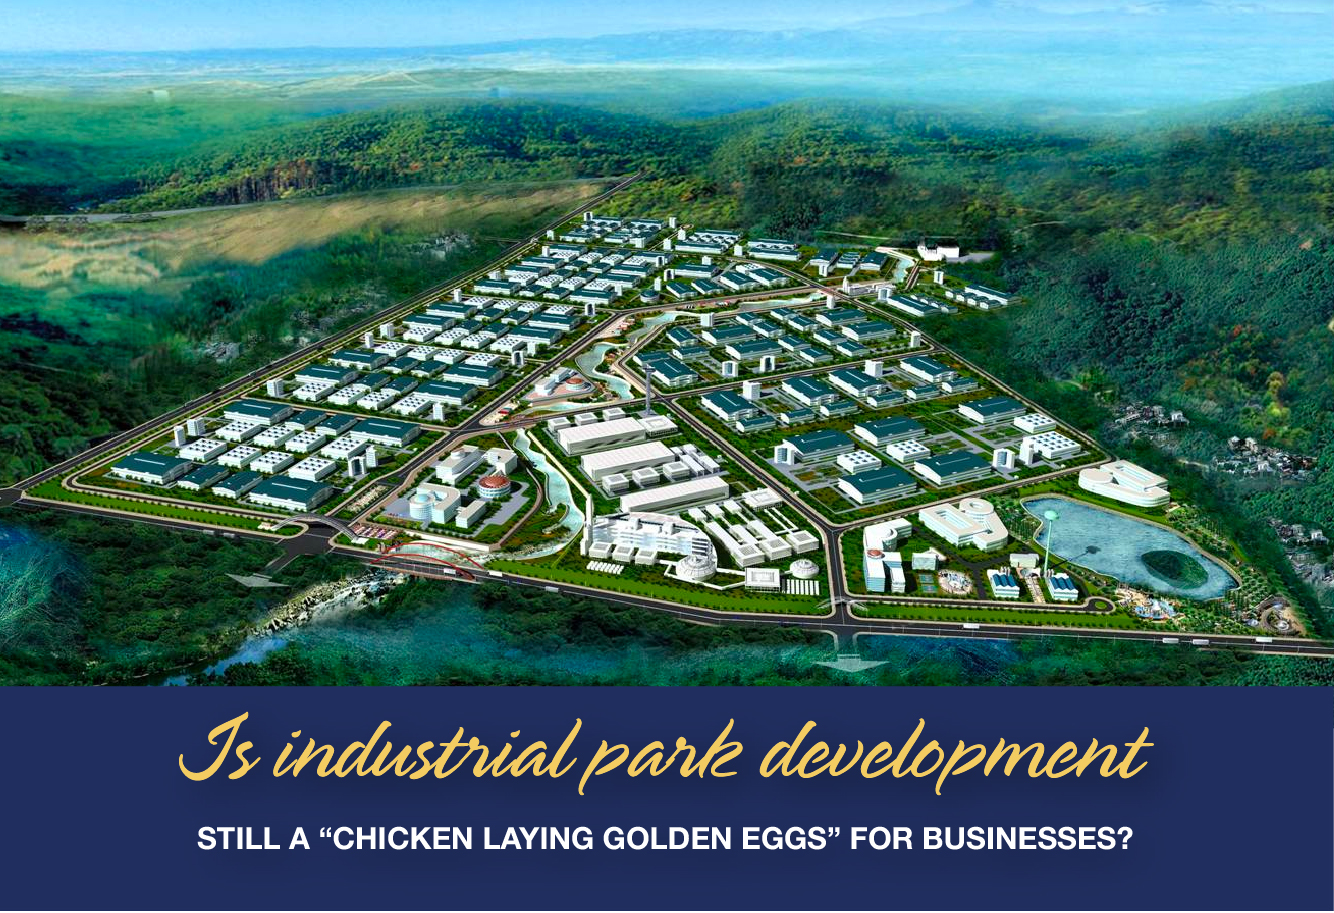 IS INDUSTRIAL PARK DEVELOPMENT STILL A “CHICKEN LAYING GOLDEN EGGS” FOR BUSINESSES?